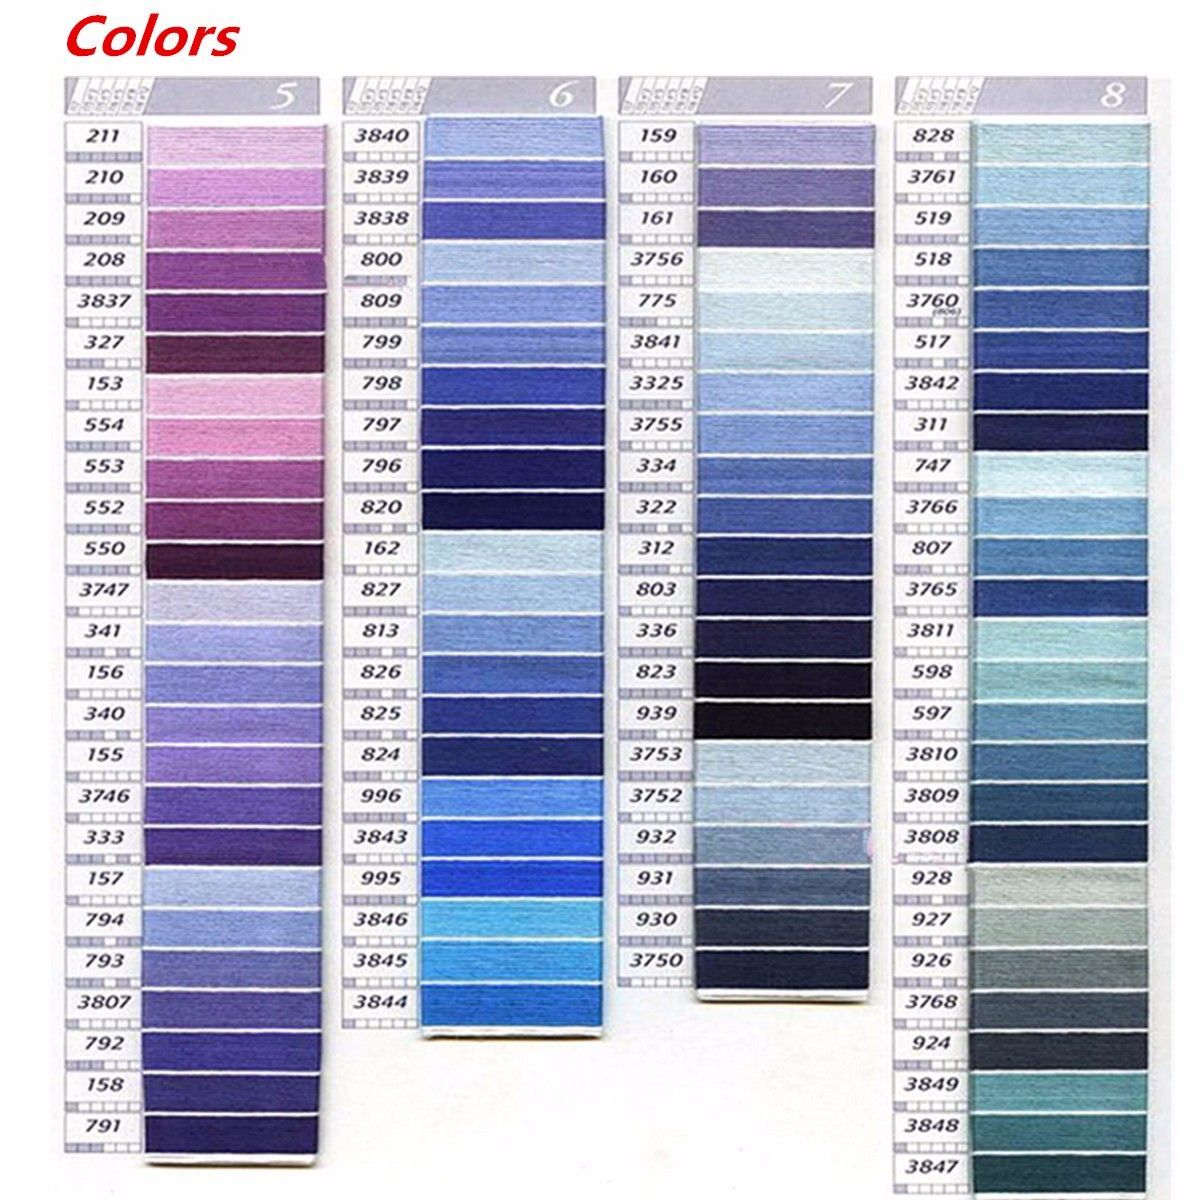 447-Colors--Cross-Stitch-Thread-Pattern-Kit-Chart-Embroidery-Floss-Sewing-Skeins-1756977